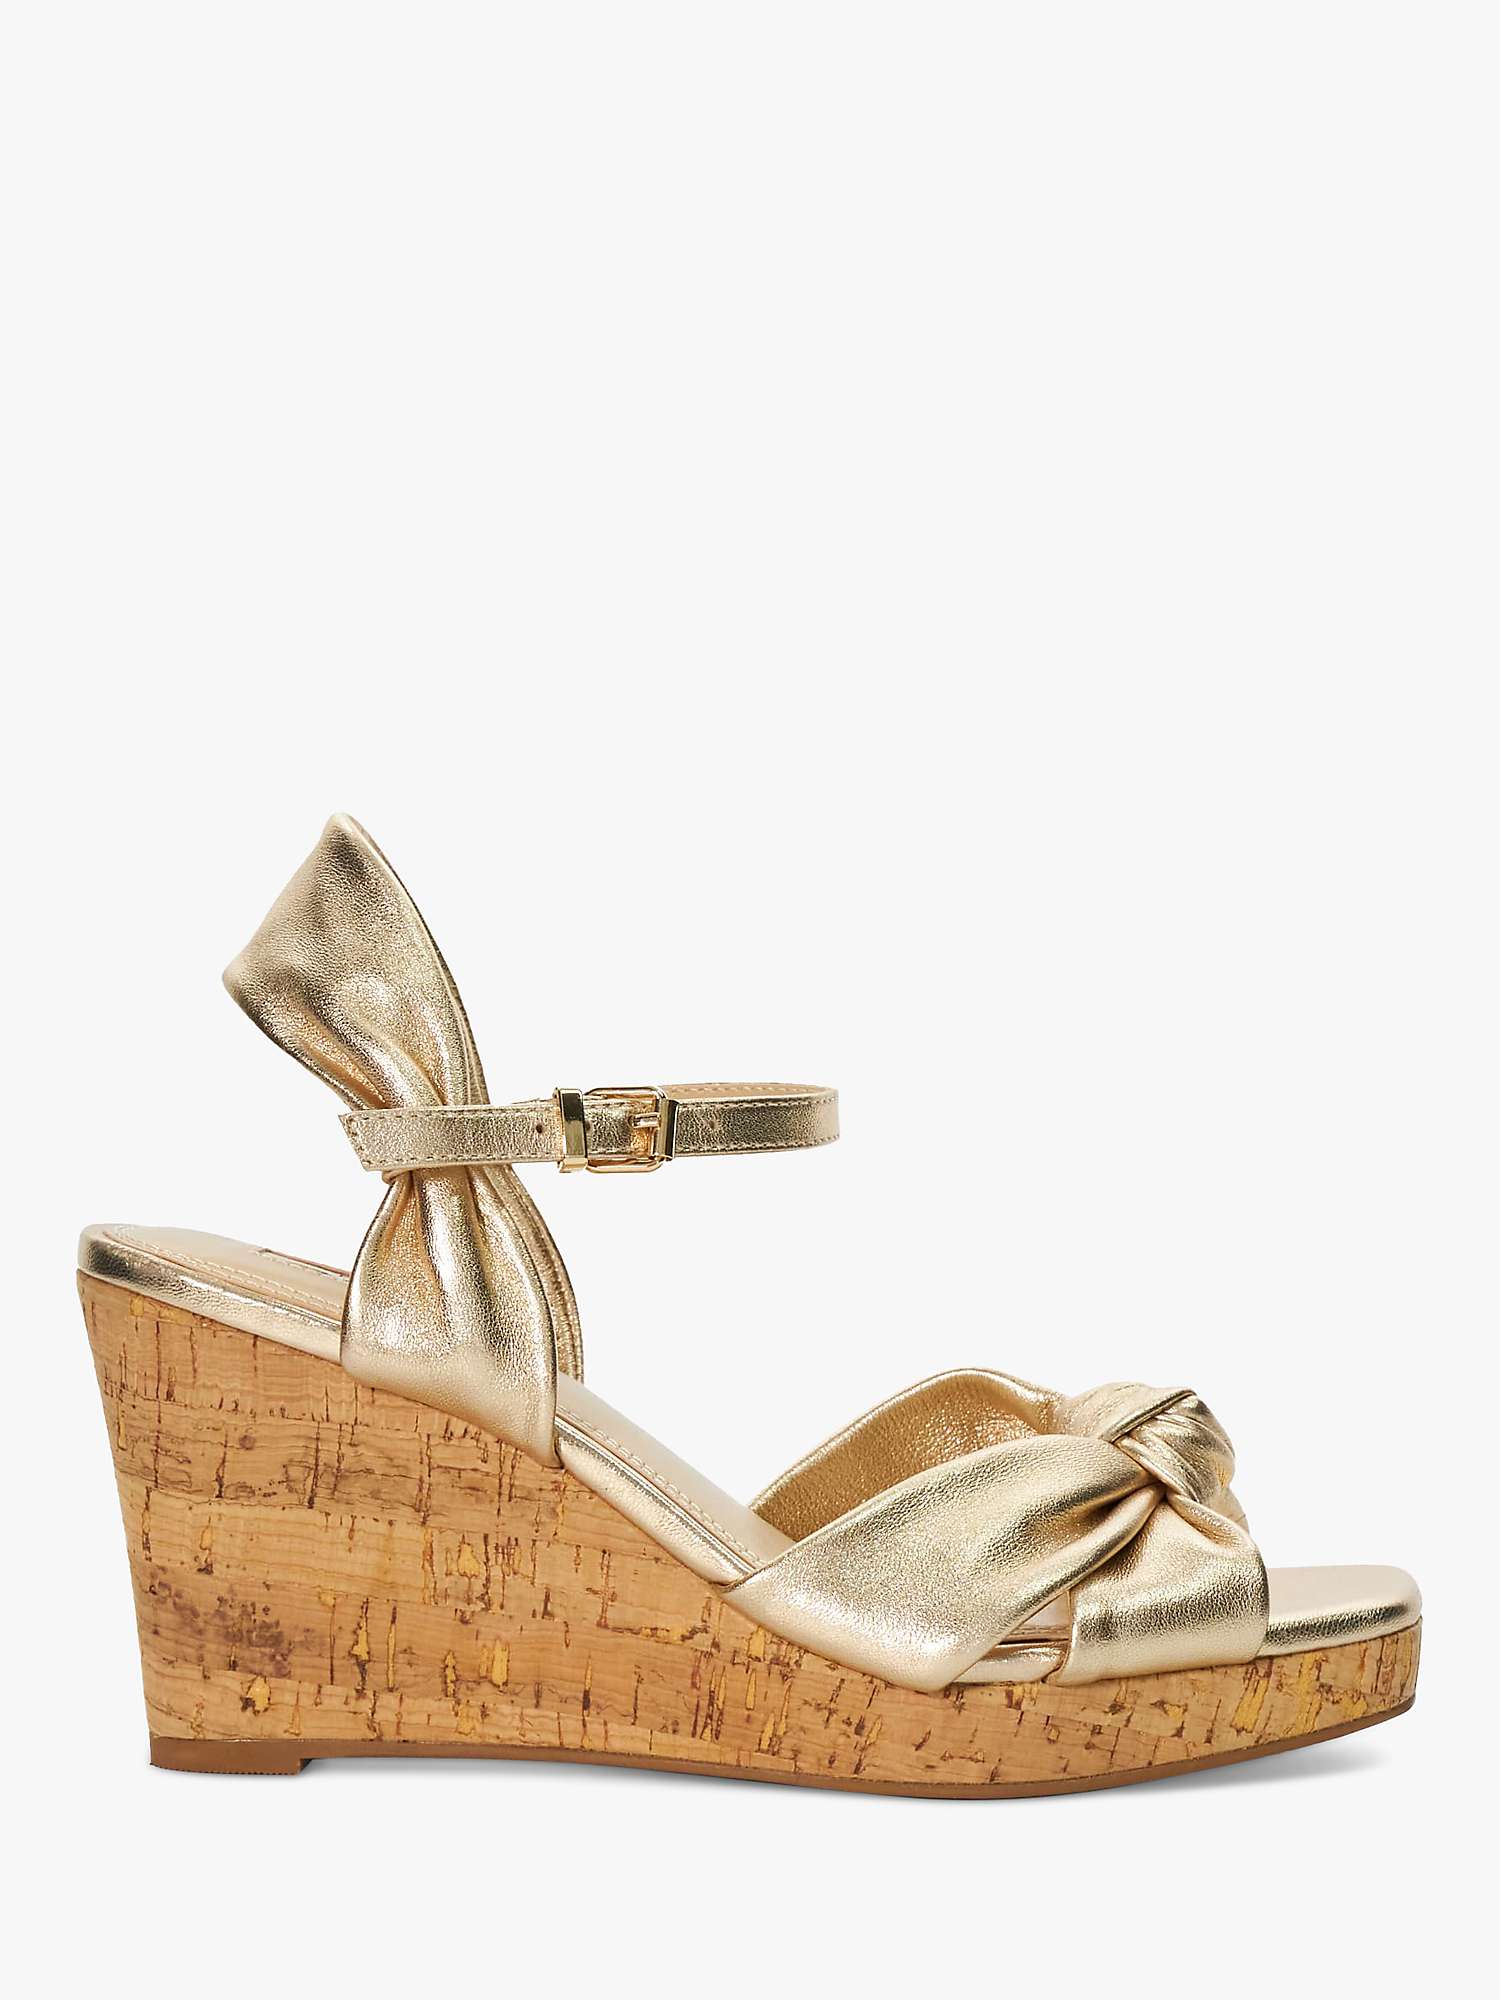 Buy Dune Kaino Knotted Leather Wedge Sandals, Gold Online at johnlewis.com